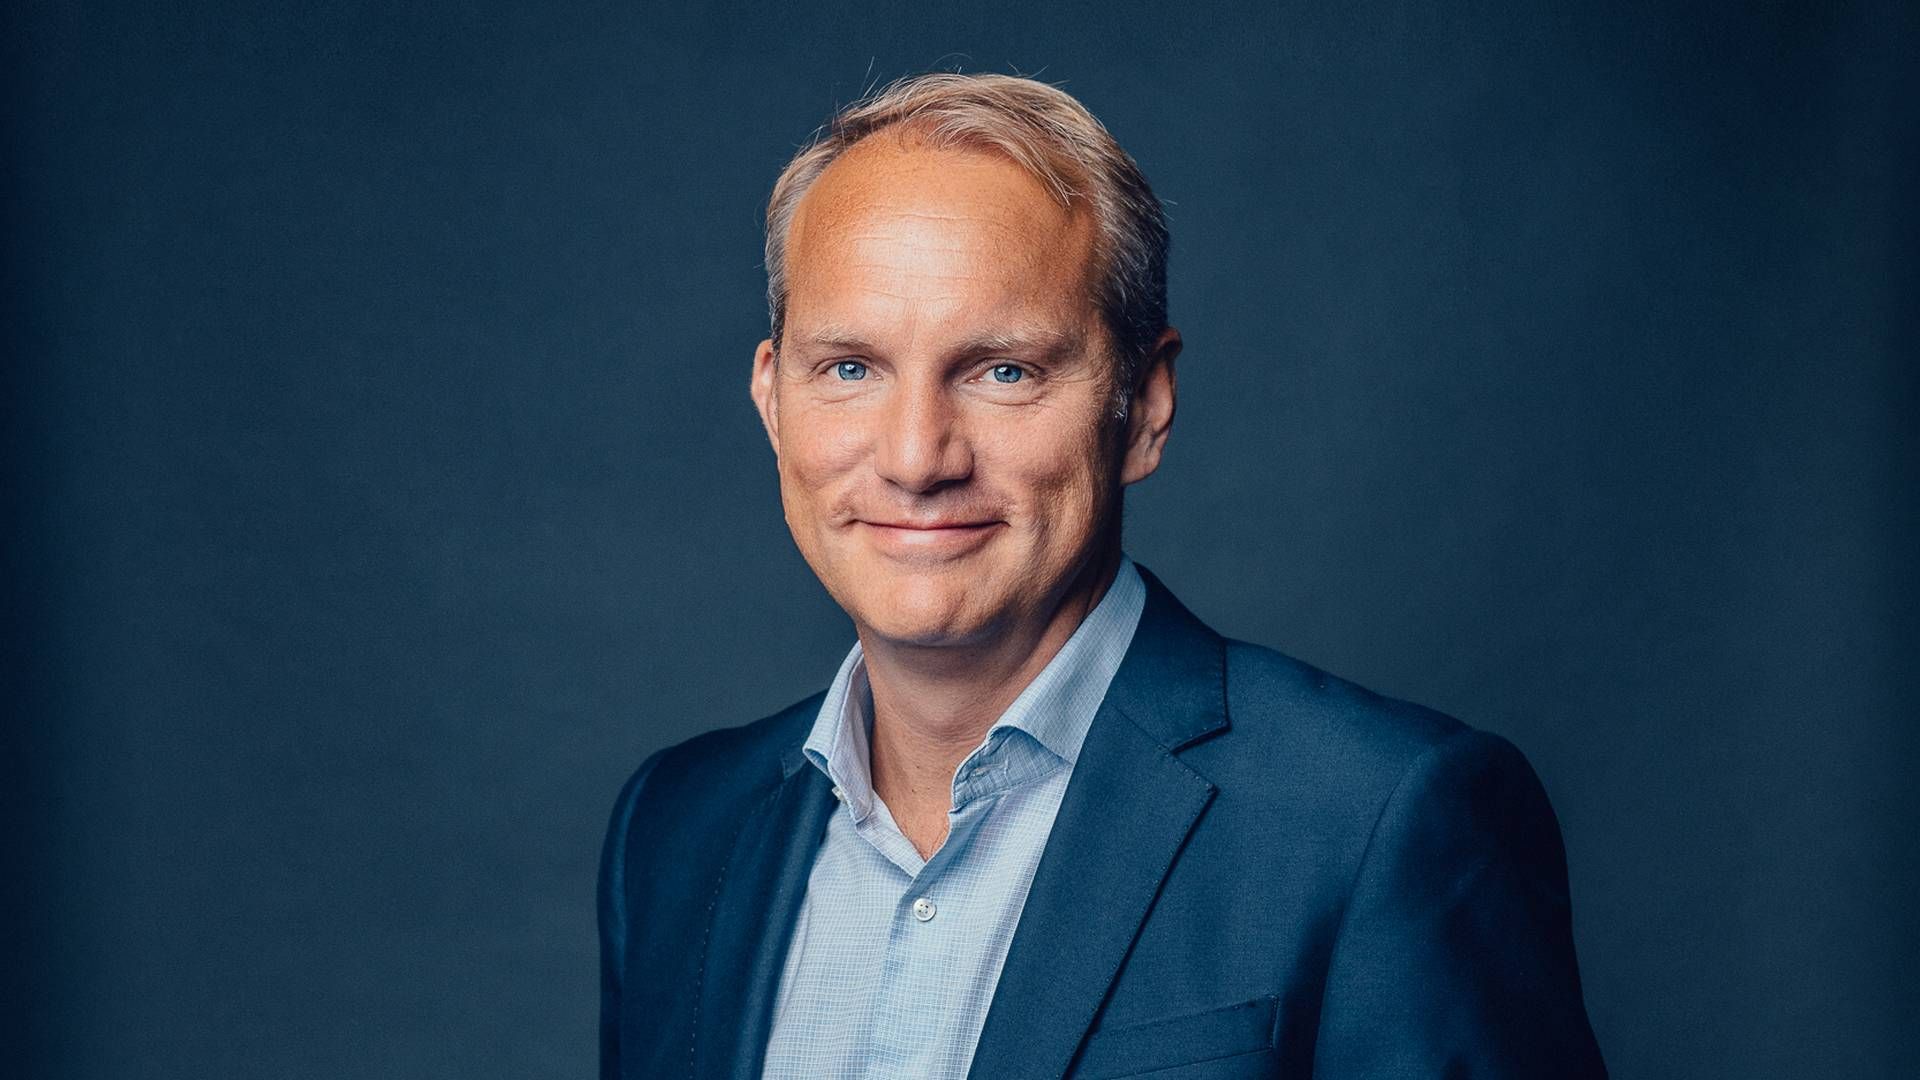 Xavier Leroi EVP and COO of Shipping Services at Wallenius Wilhelmsen says that the decision about a potential surcharge has not been made yet. | Photo: Wallenius Wilhelmsen